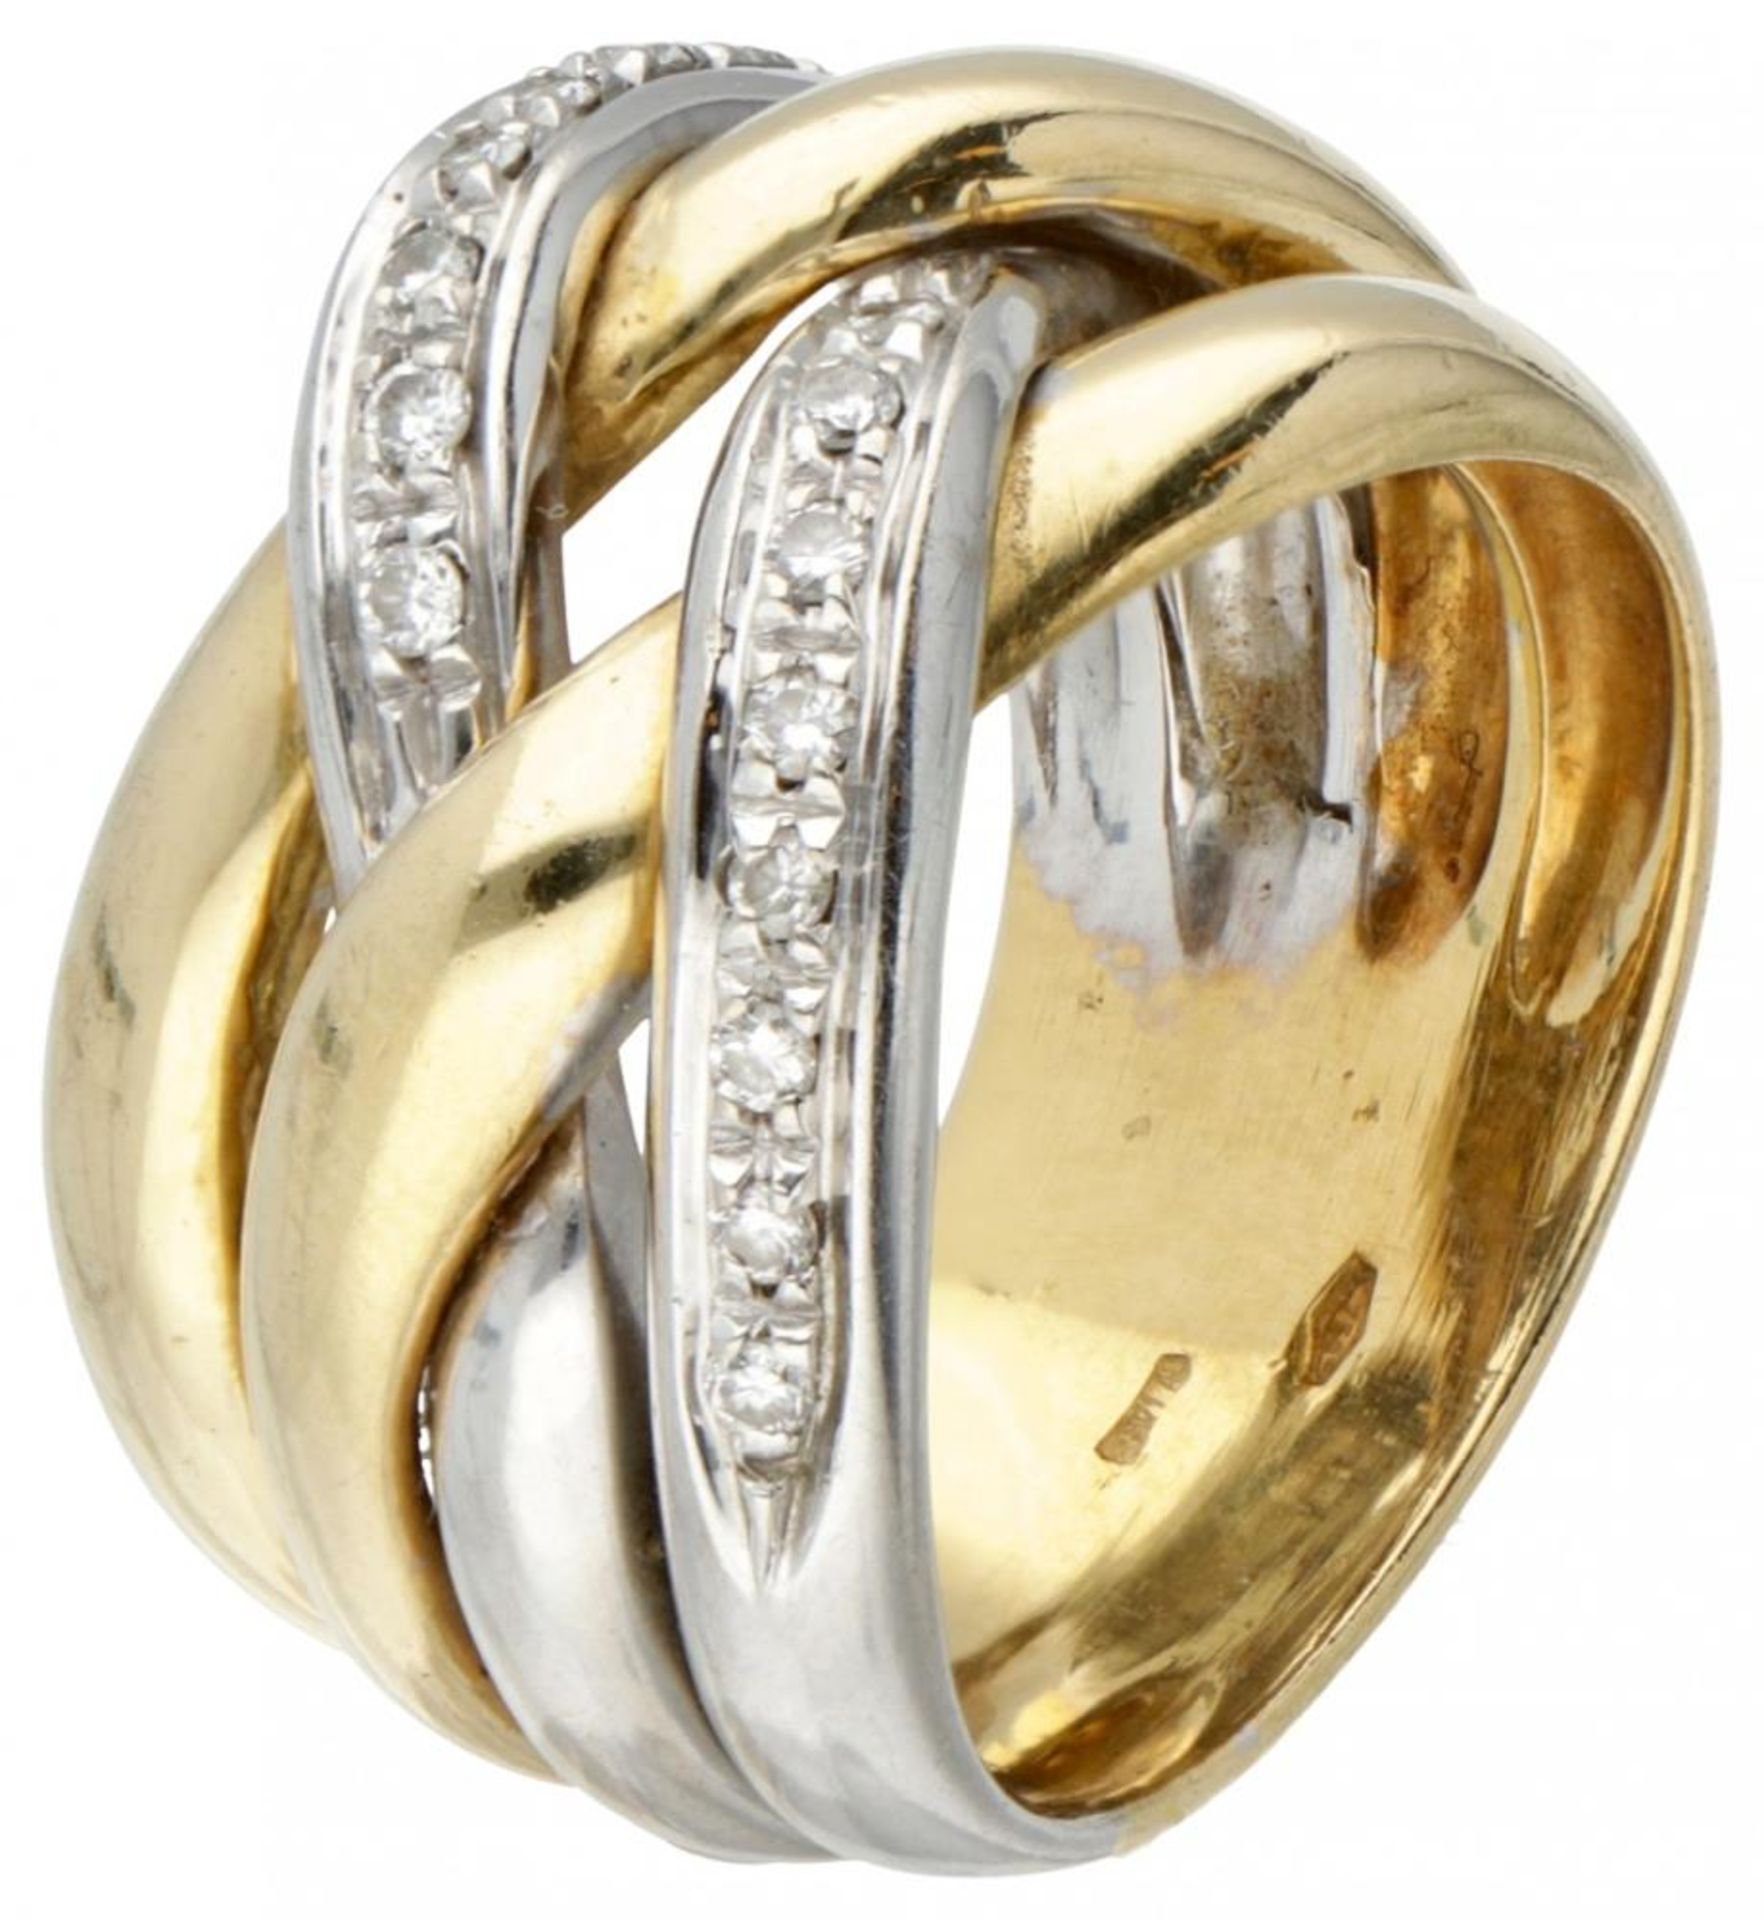 18K. Bicolor gold braided ring set with approx. 0.16 ct diamond.